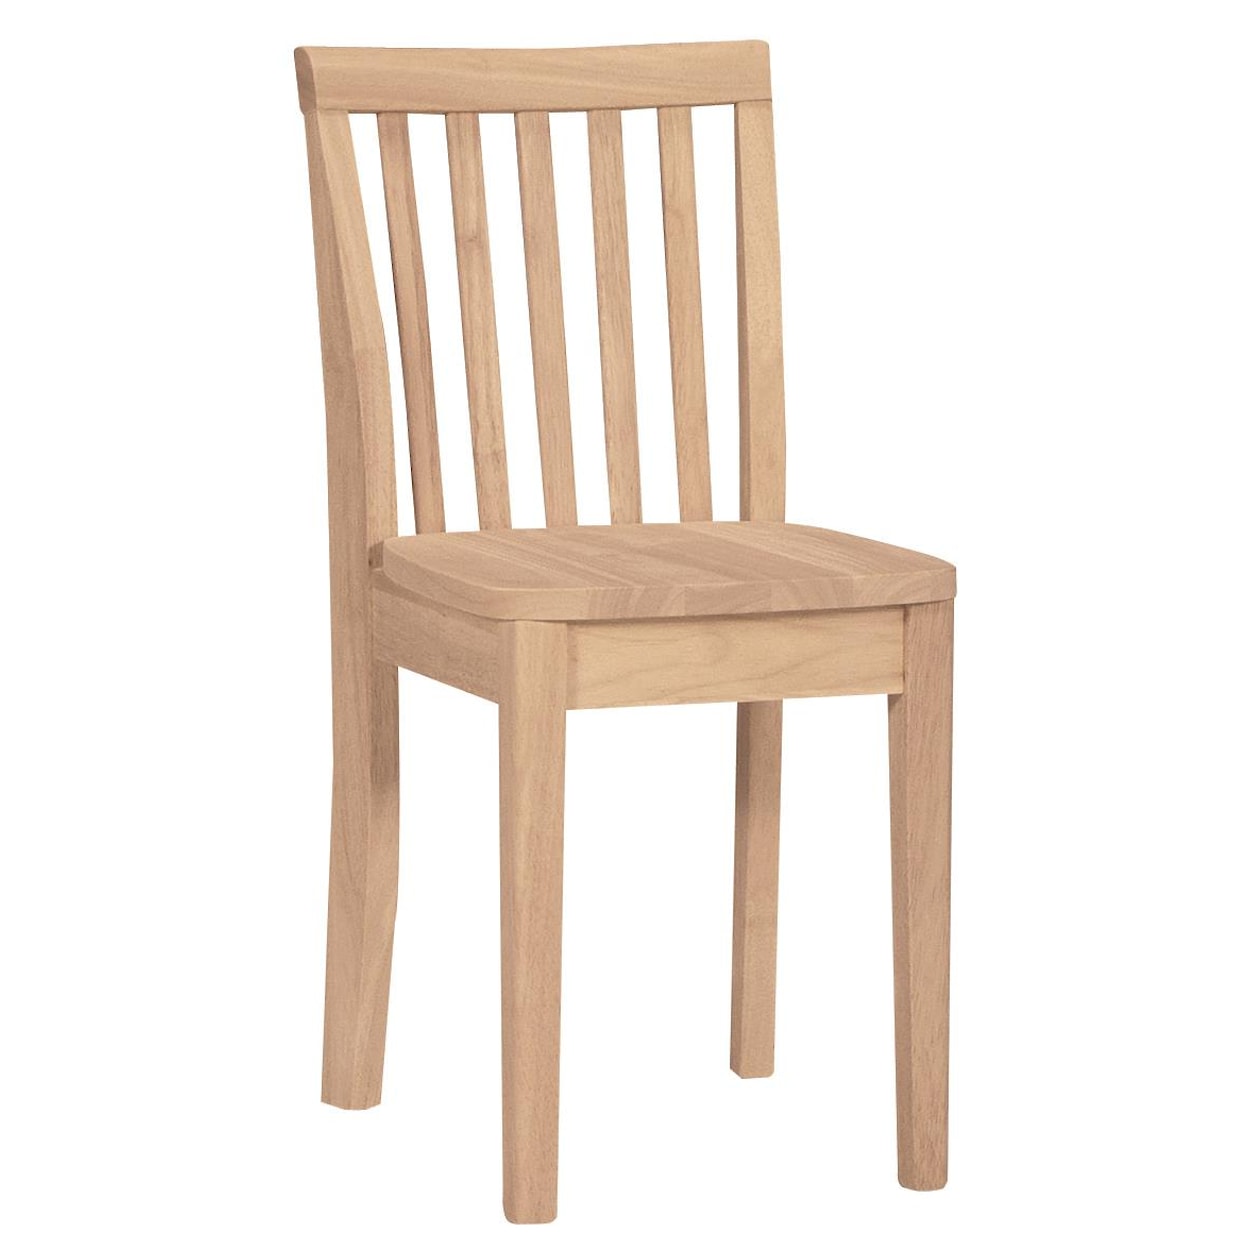 Whitewood Juvenile Child's Chair